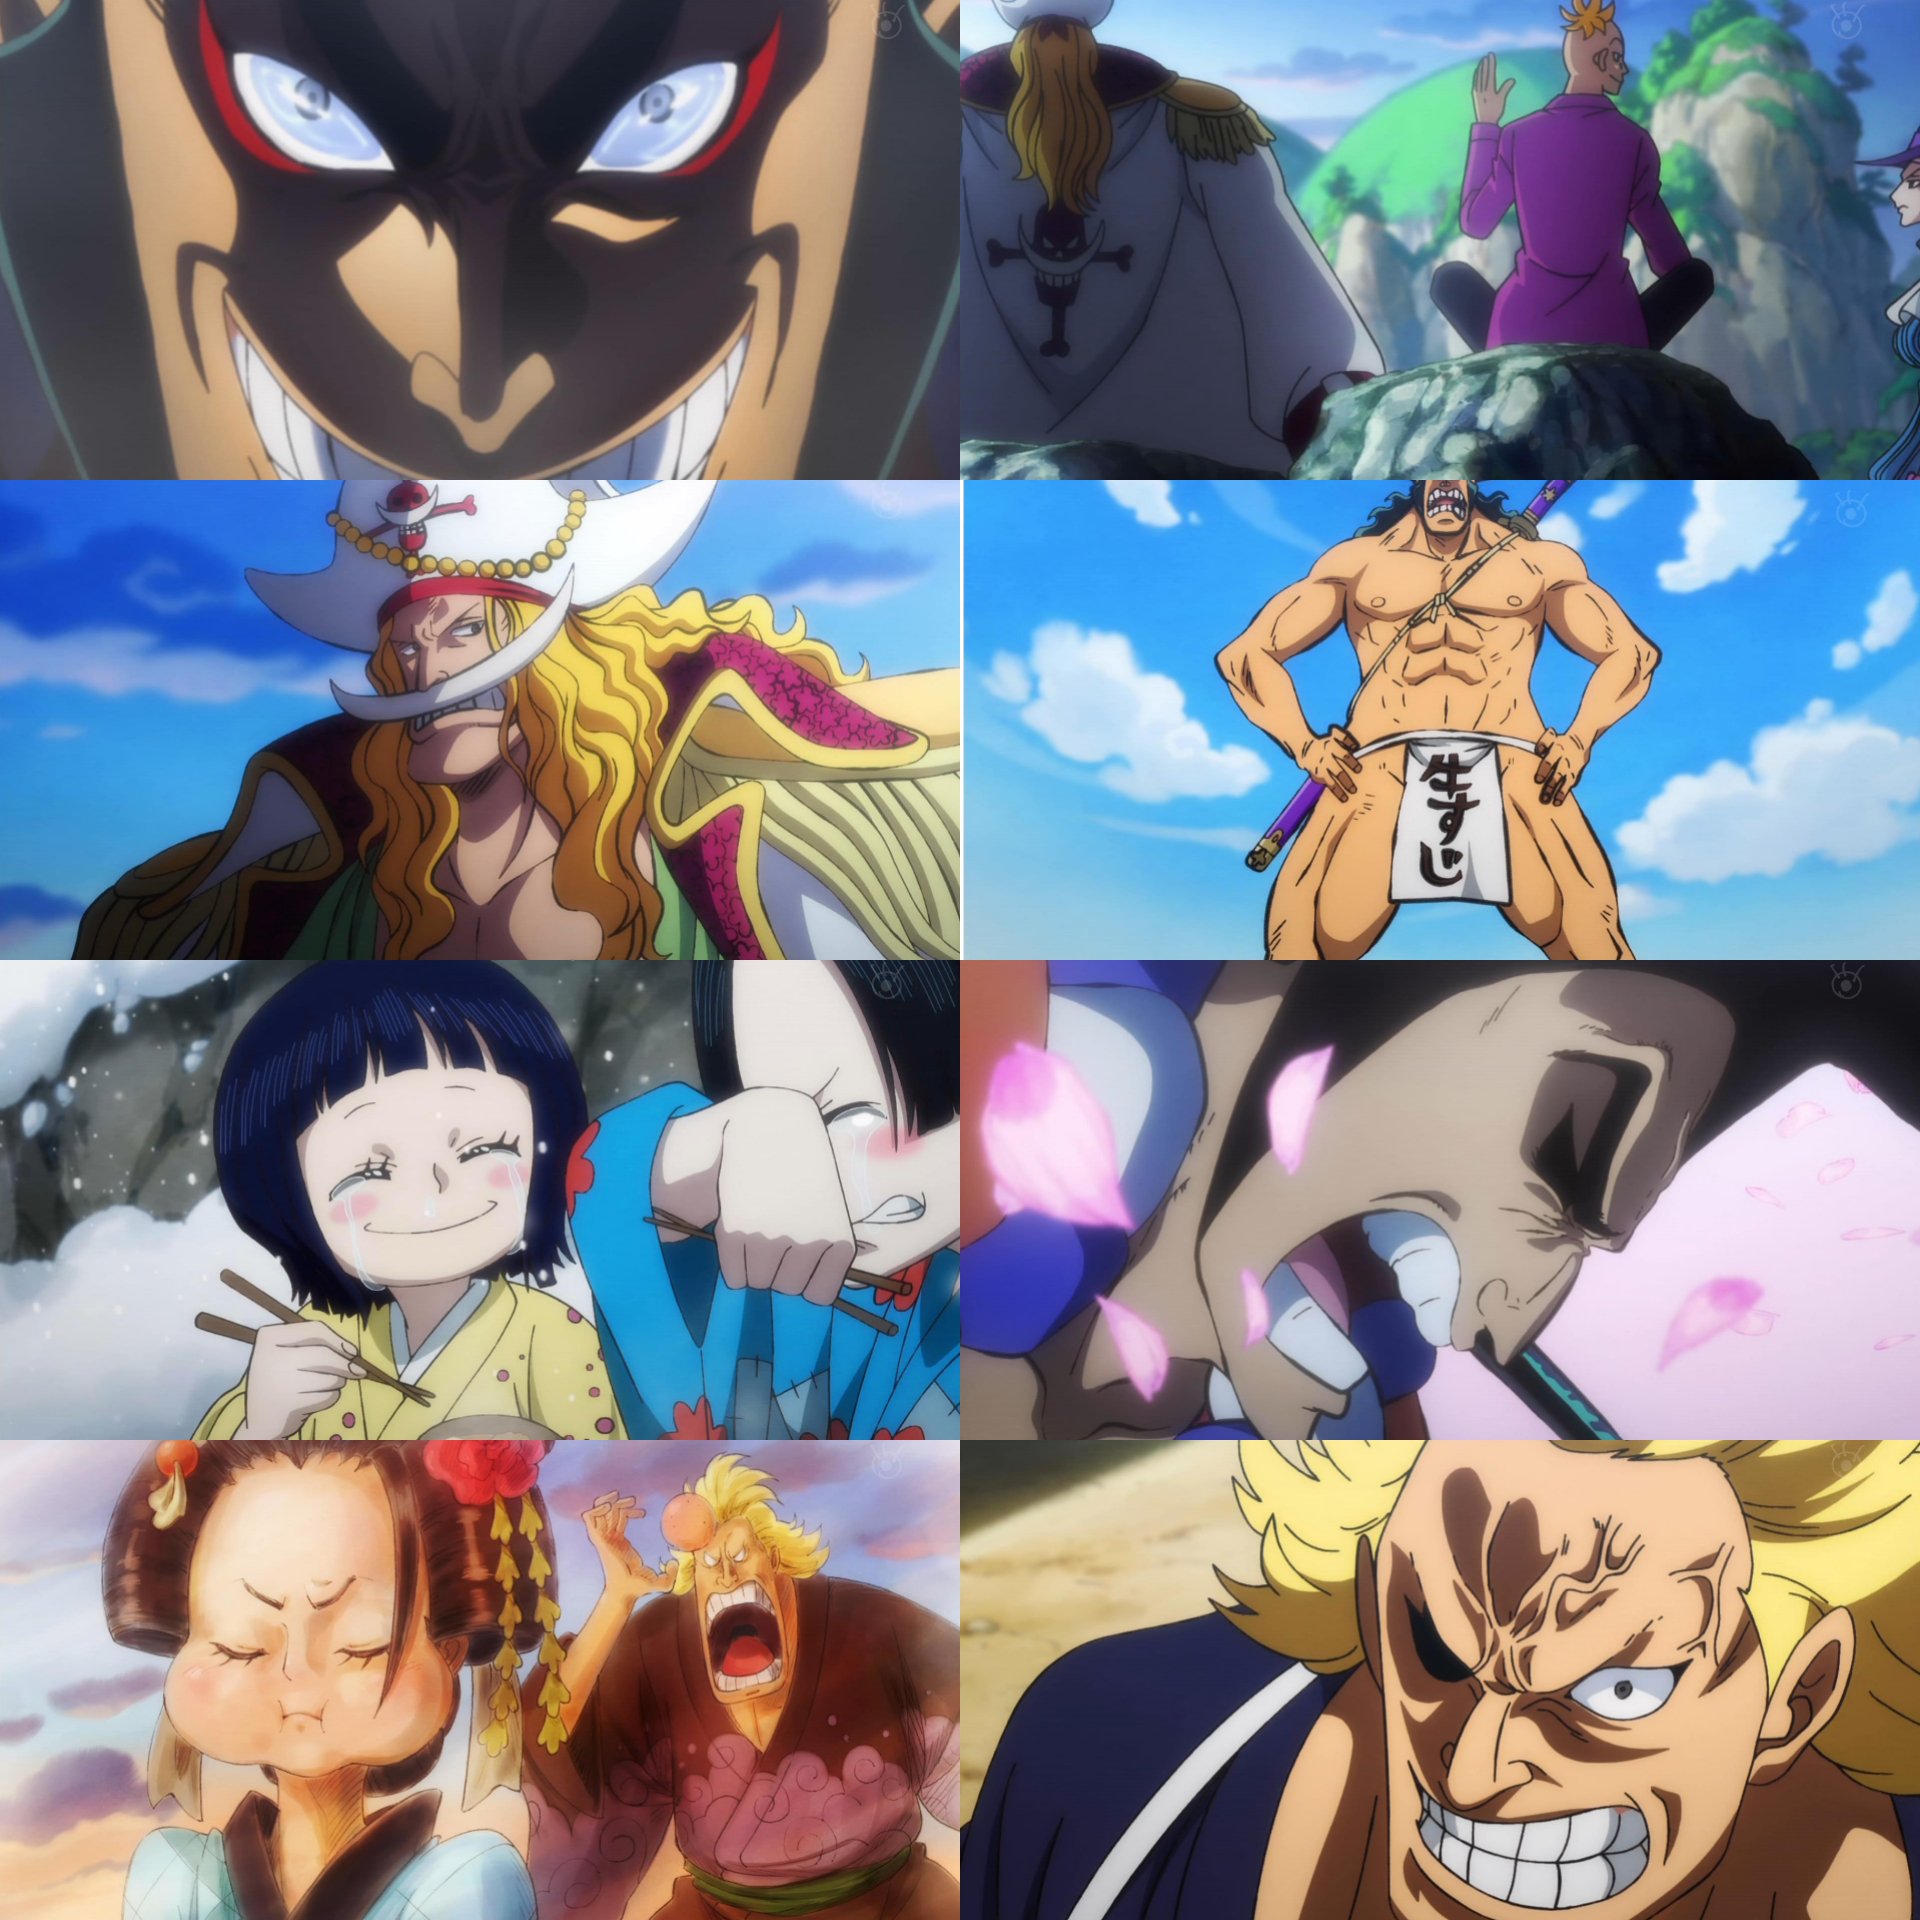 Anime City One Piece Episode 961 Was A Great Episode T Co Qn1t4ft0bu Twitter